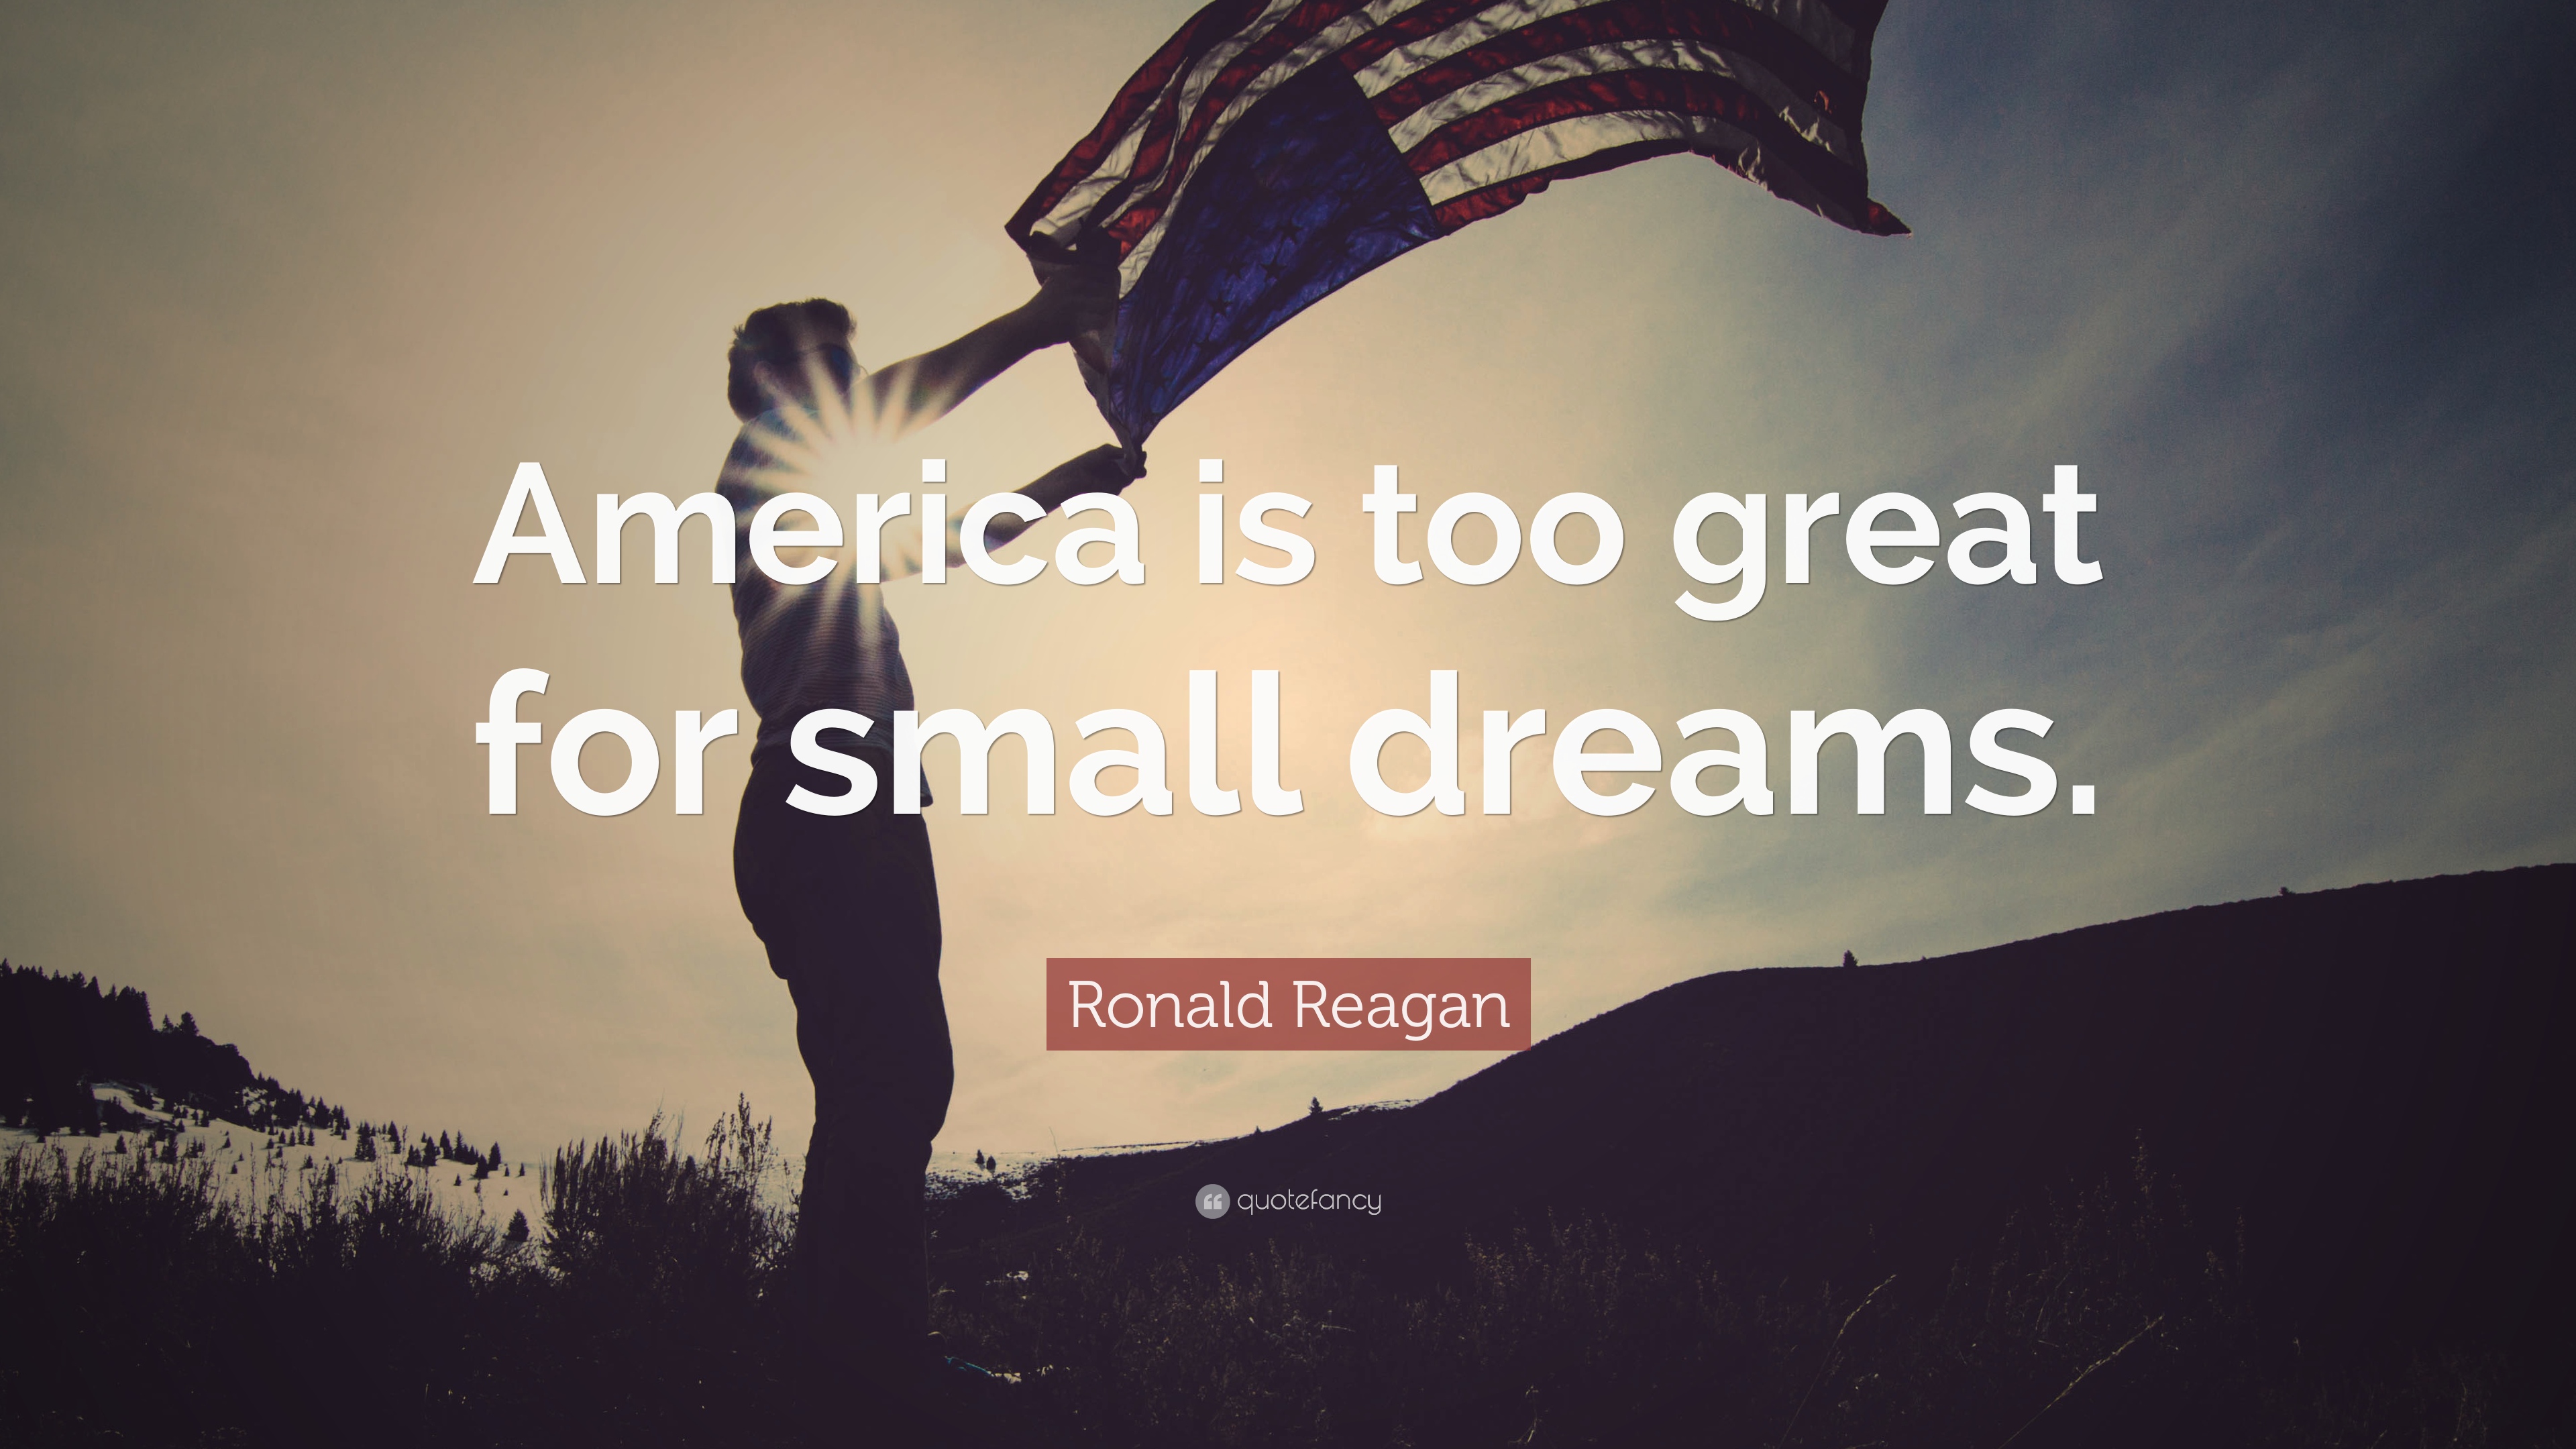 Ronald Reagan - Ronald Reagan America Is Too Great For Small Dreams , HD Wallpaper & Backgrounds